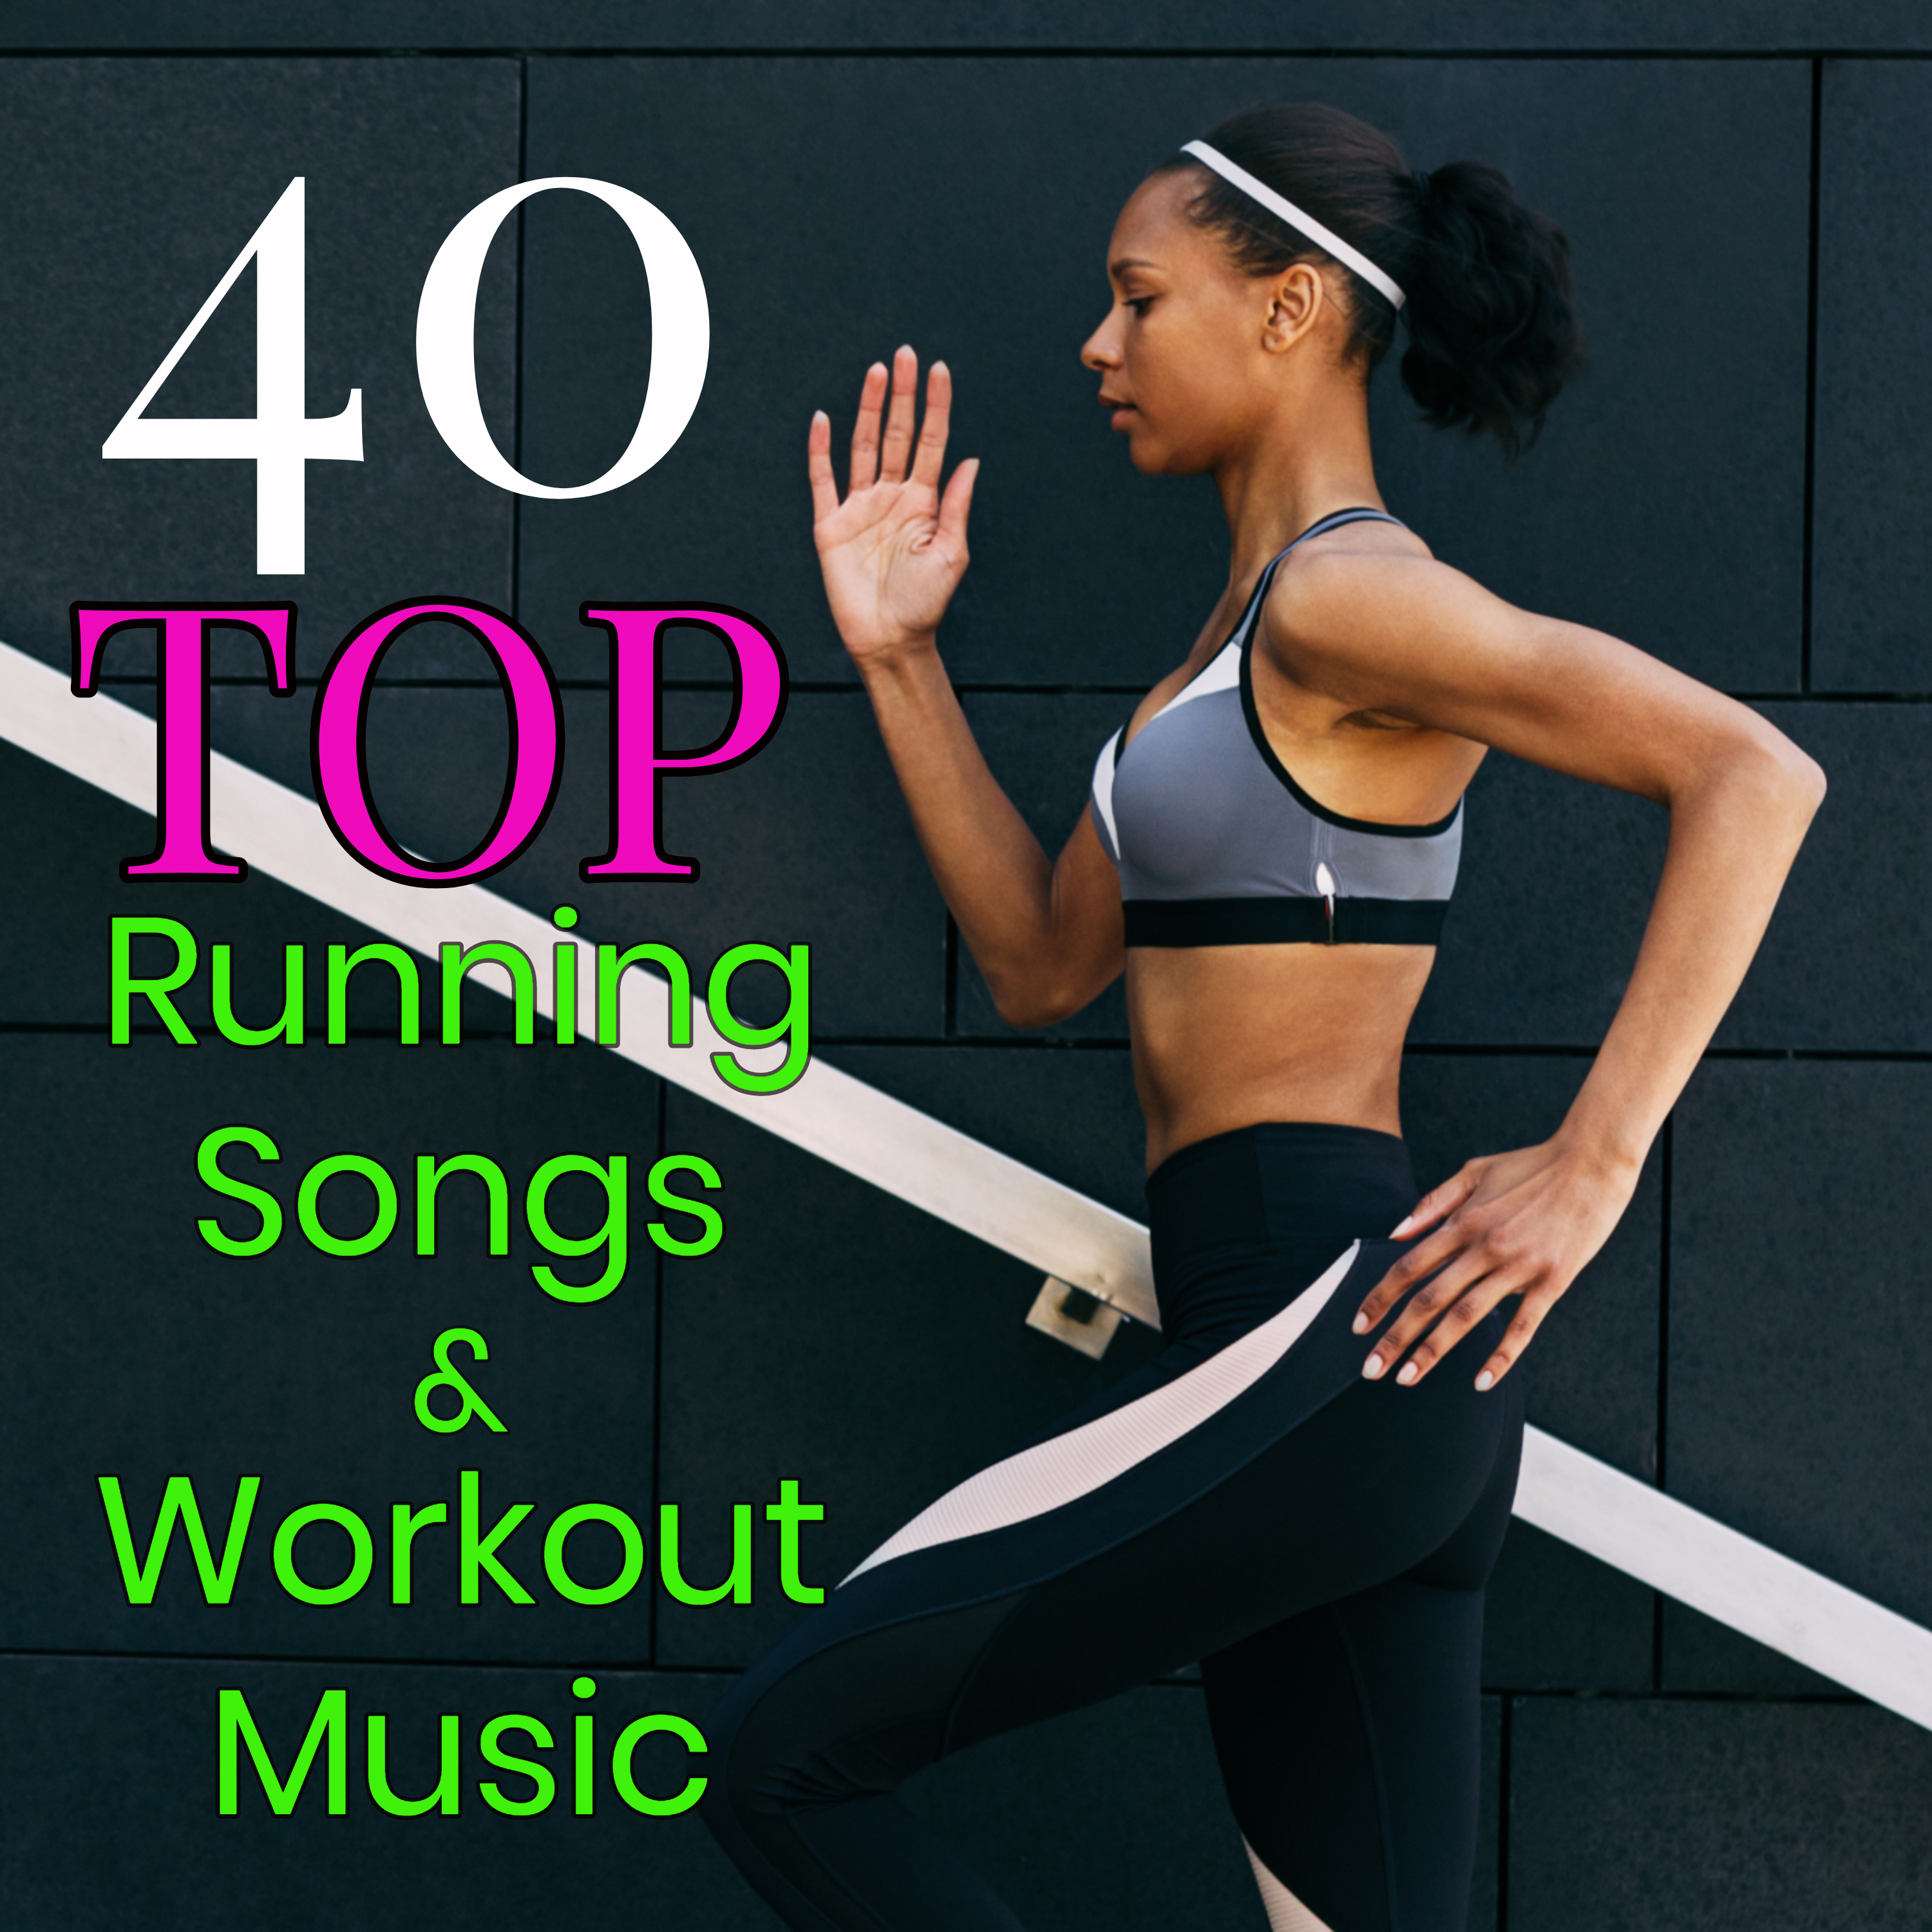 Future Bounce - Workout Songs